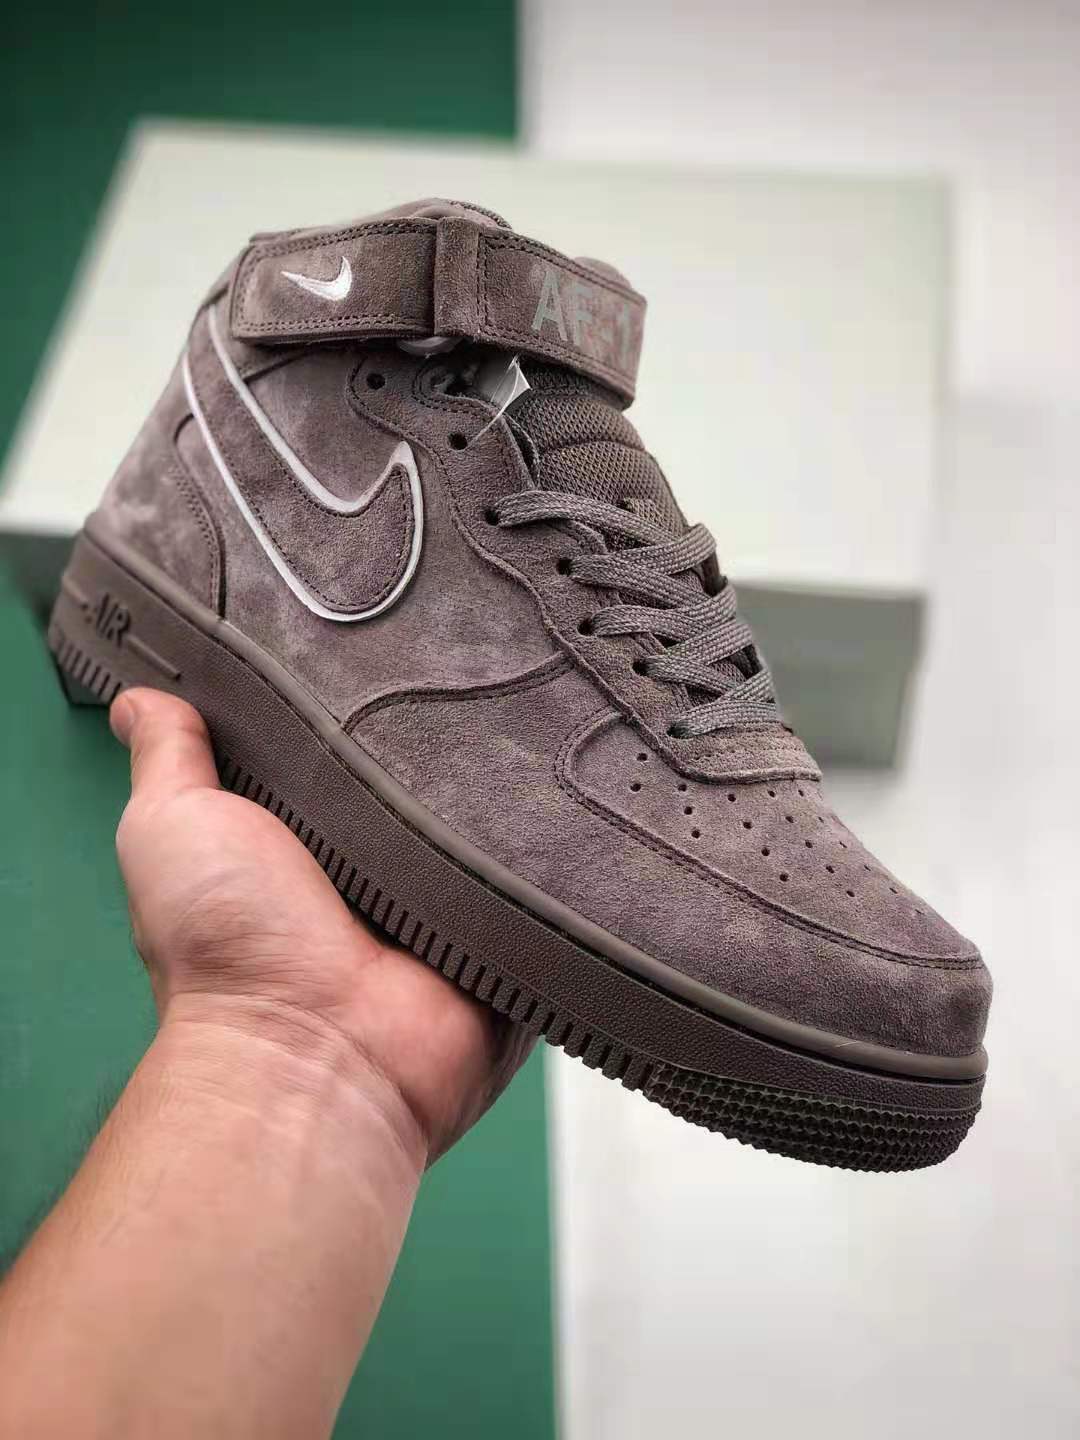 Nike Air Force 1 High '07 LV8 Suede Atmosphere Grey AA1118-003 | Stylish and Versatile Sneakers